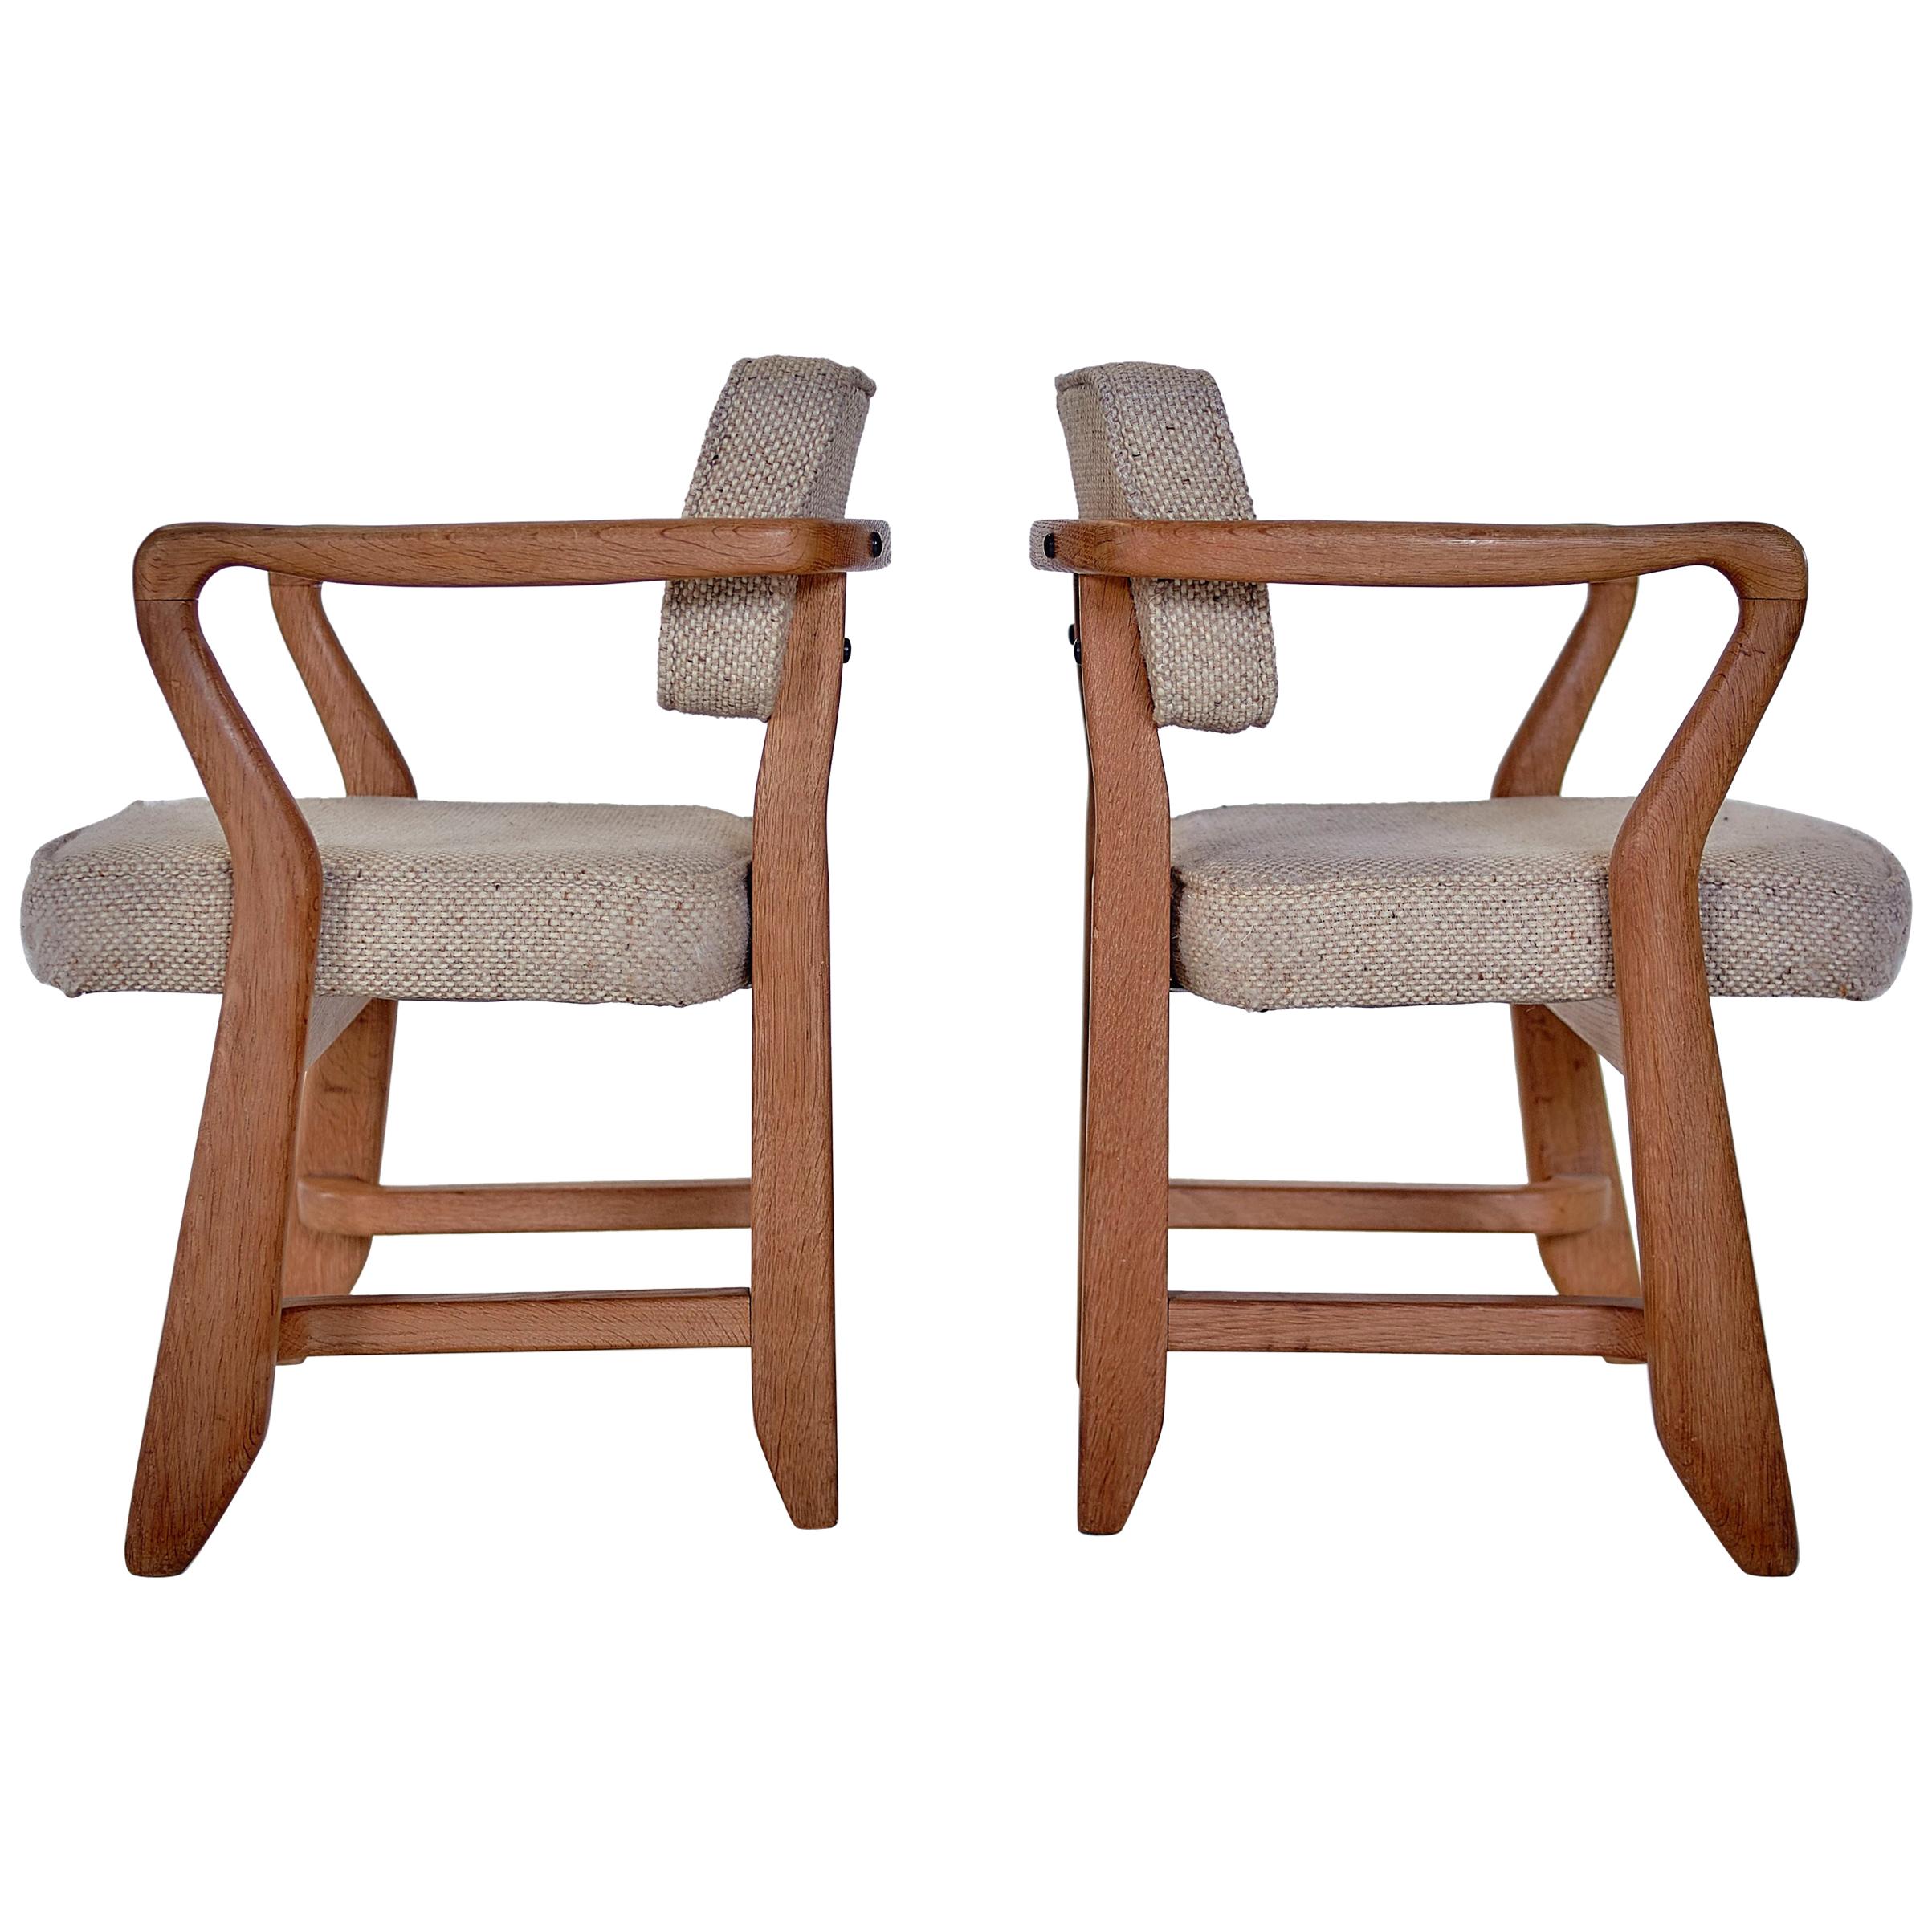 Guillerme & Chambron, Pair of Midcentury Solid Oak and Fabric French Chairs 1959